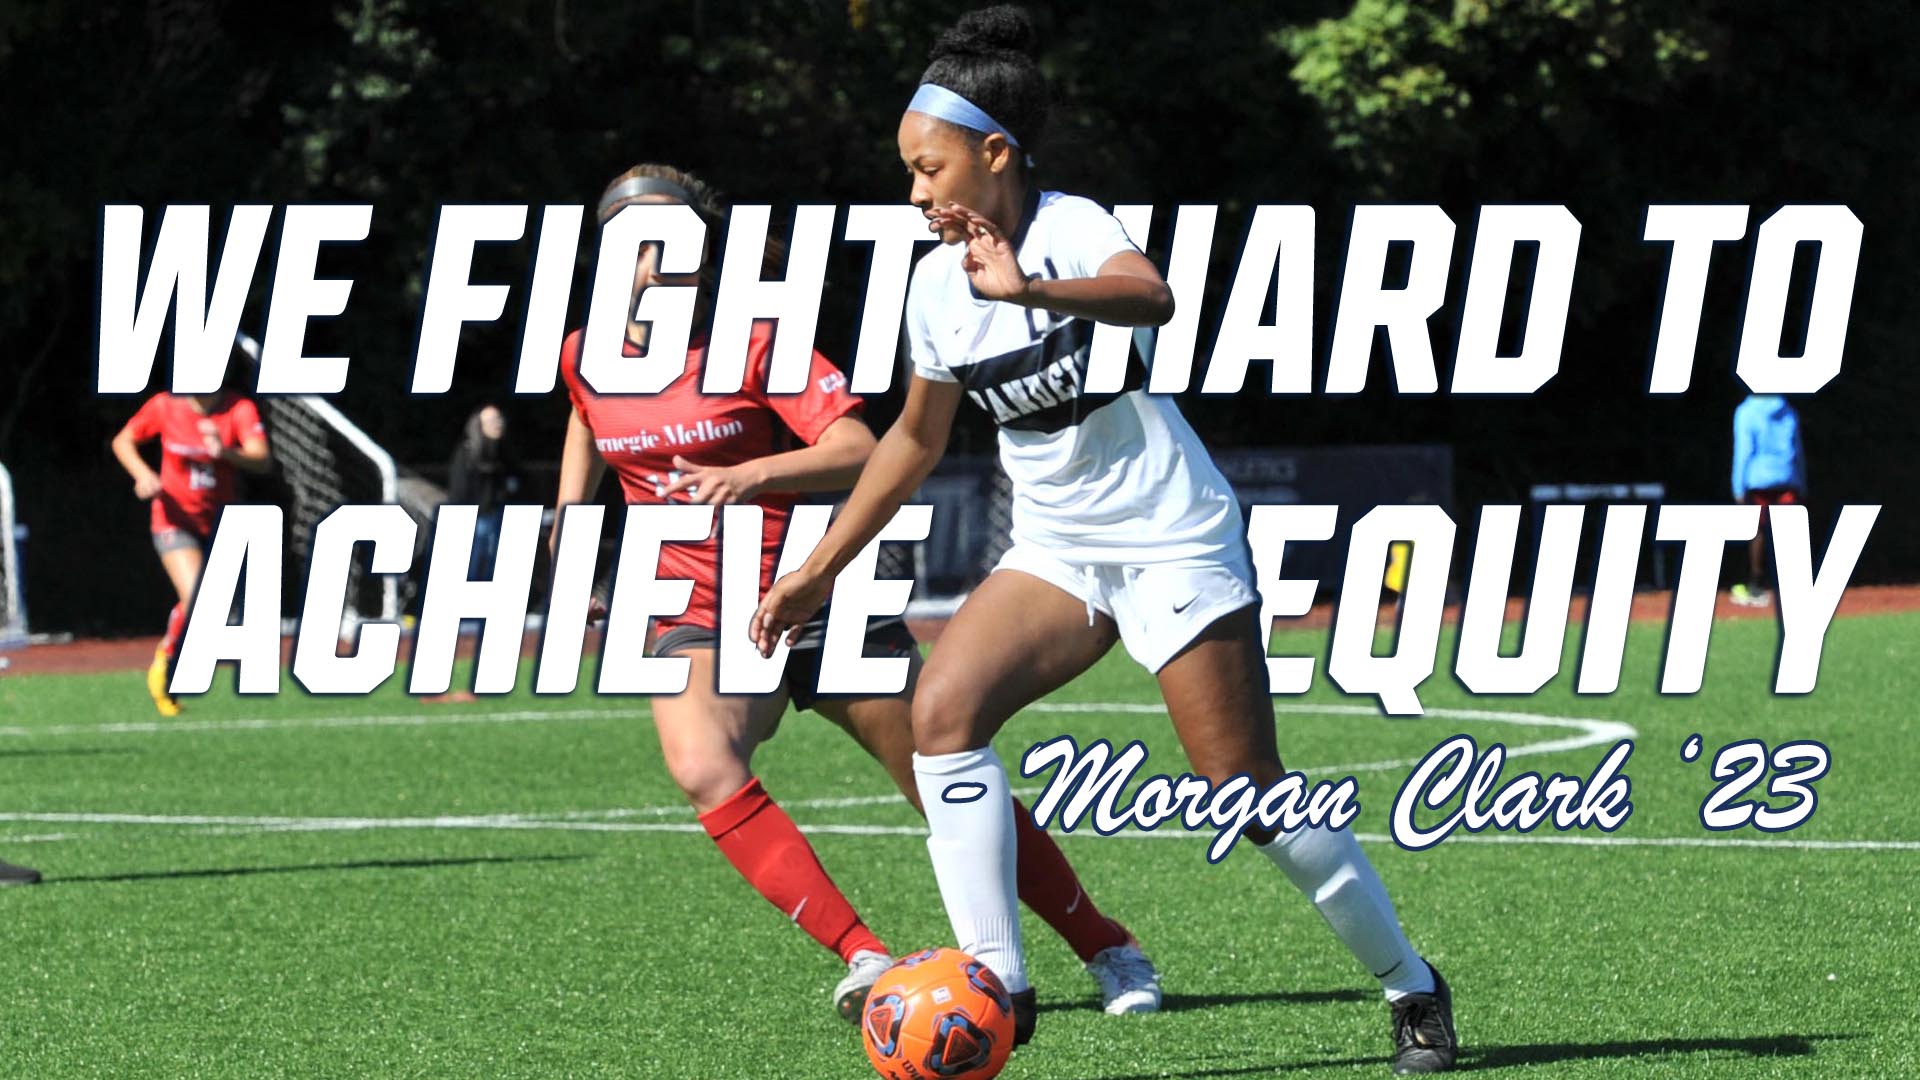 Soccer player Morgan Clark dribbling a soccer ball with text: We fight hard to achieve equity.